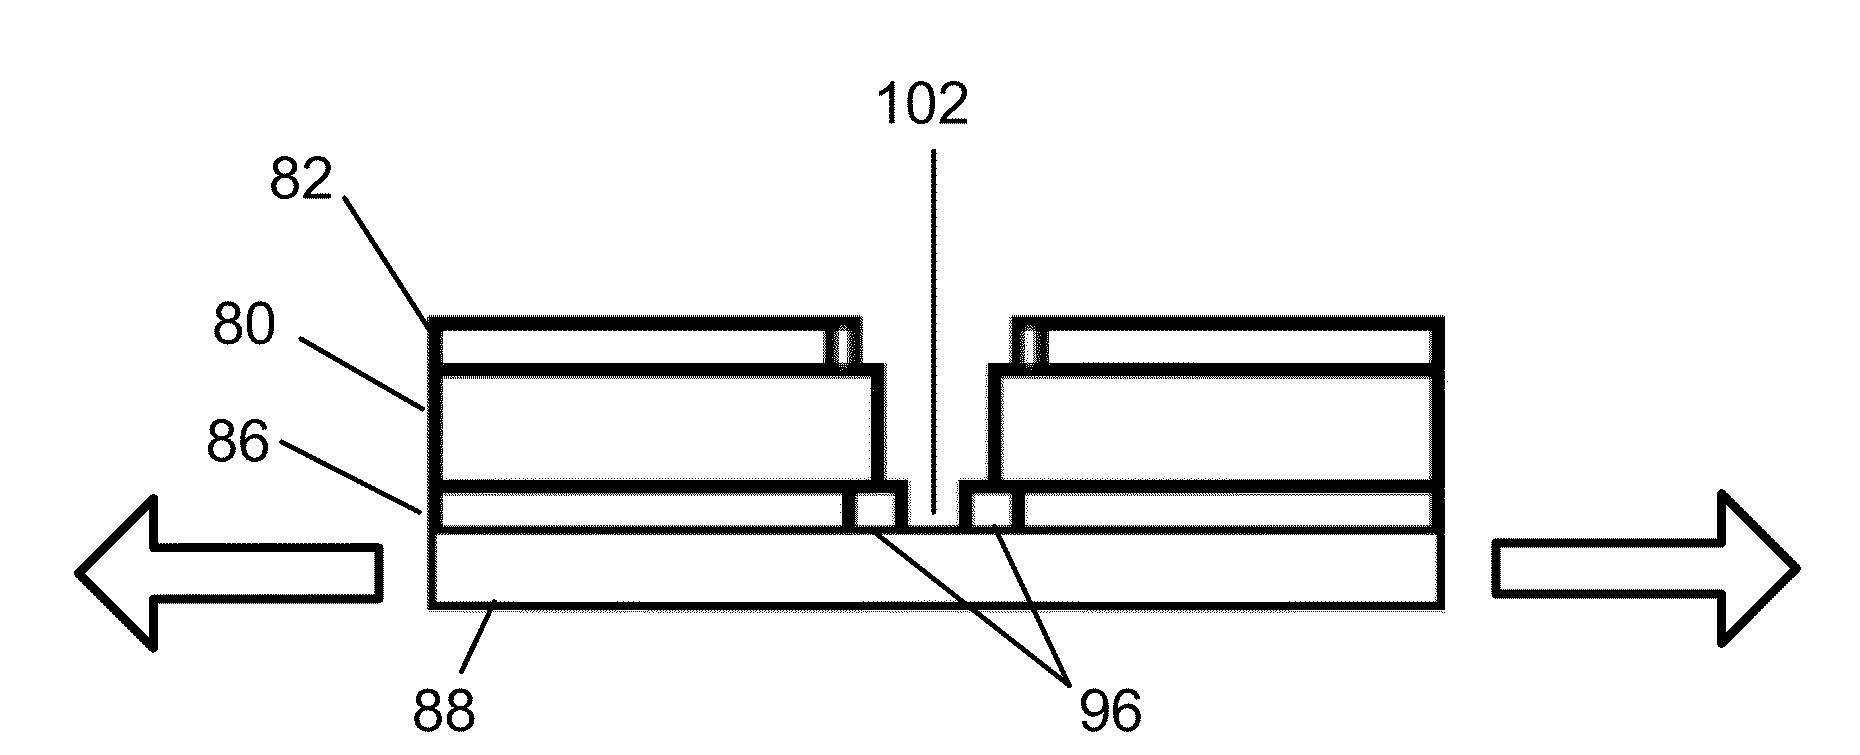 Method and apparatus for improved wafer singulation